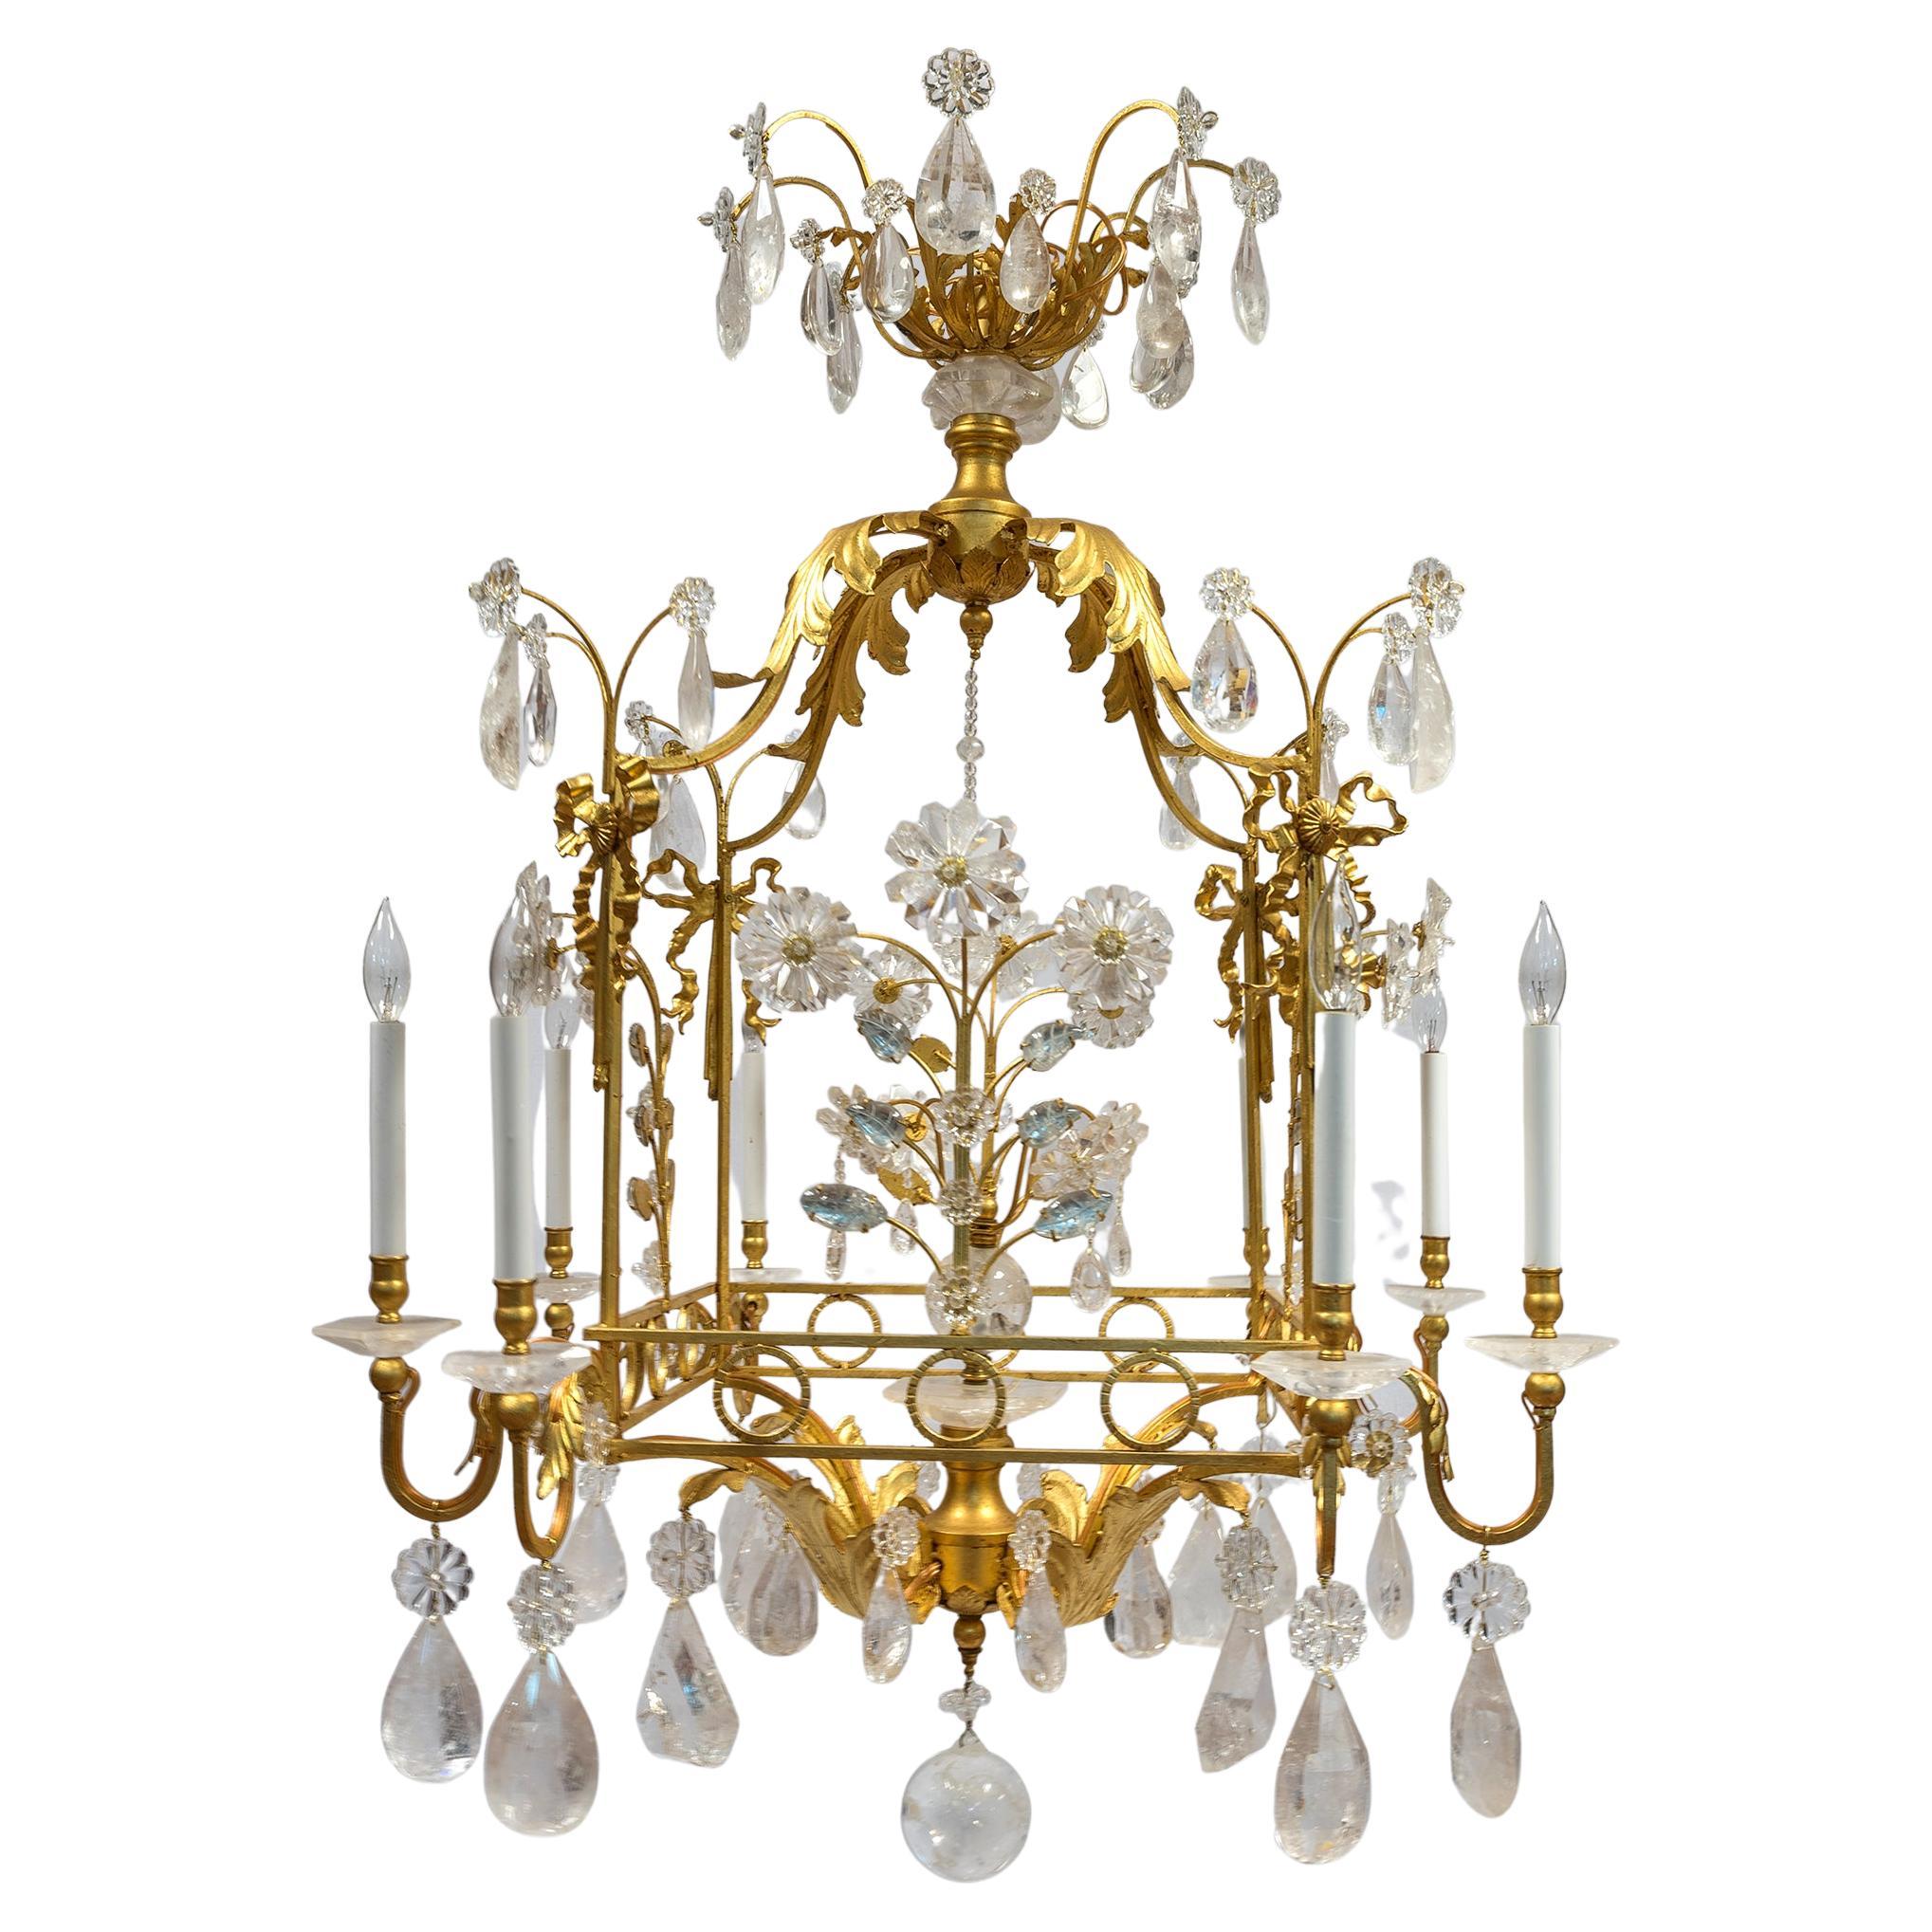  Opulent Rock Crystal Chandelier with foliage and ribbon motif